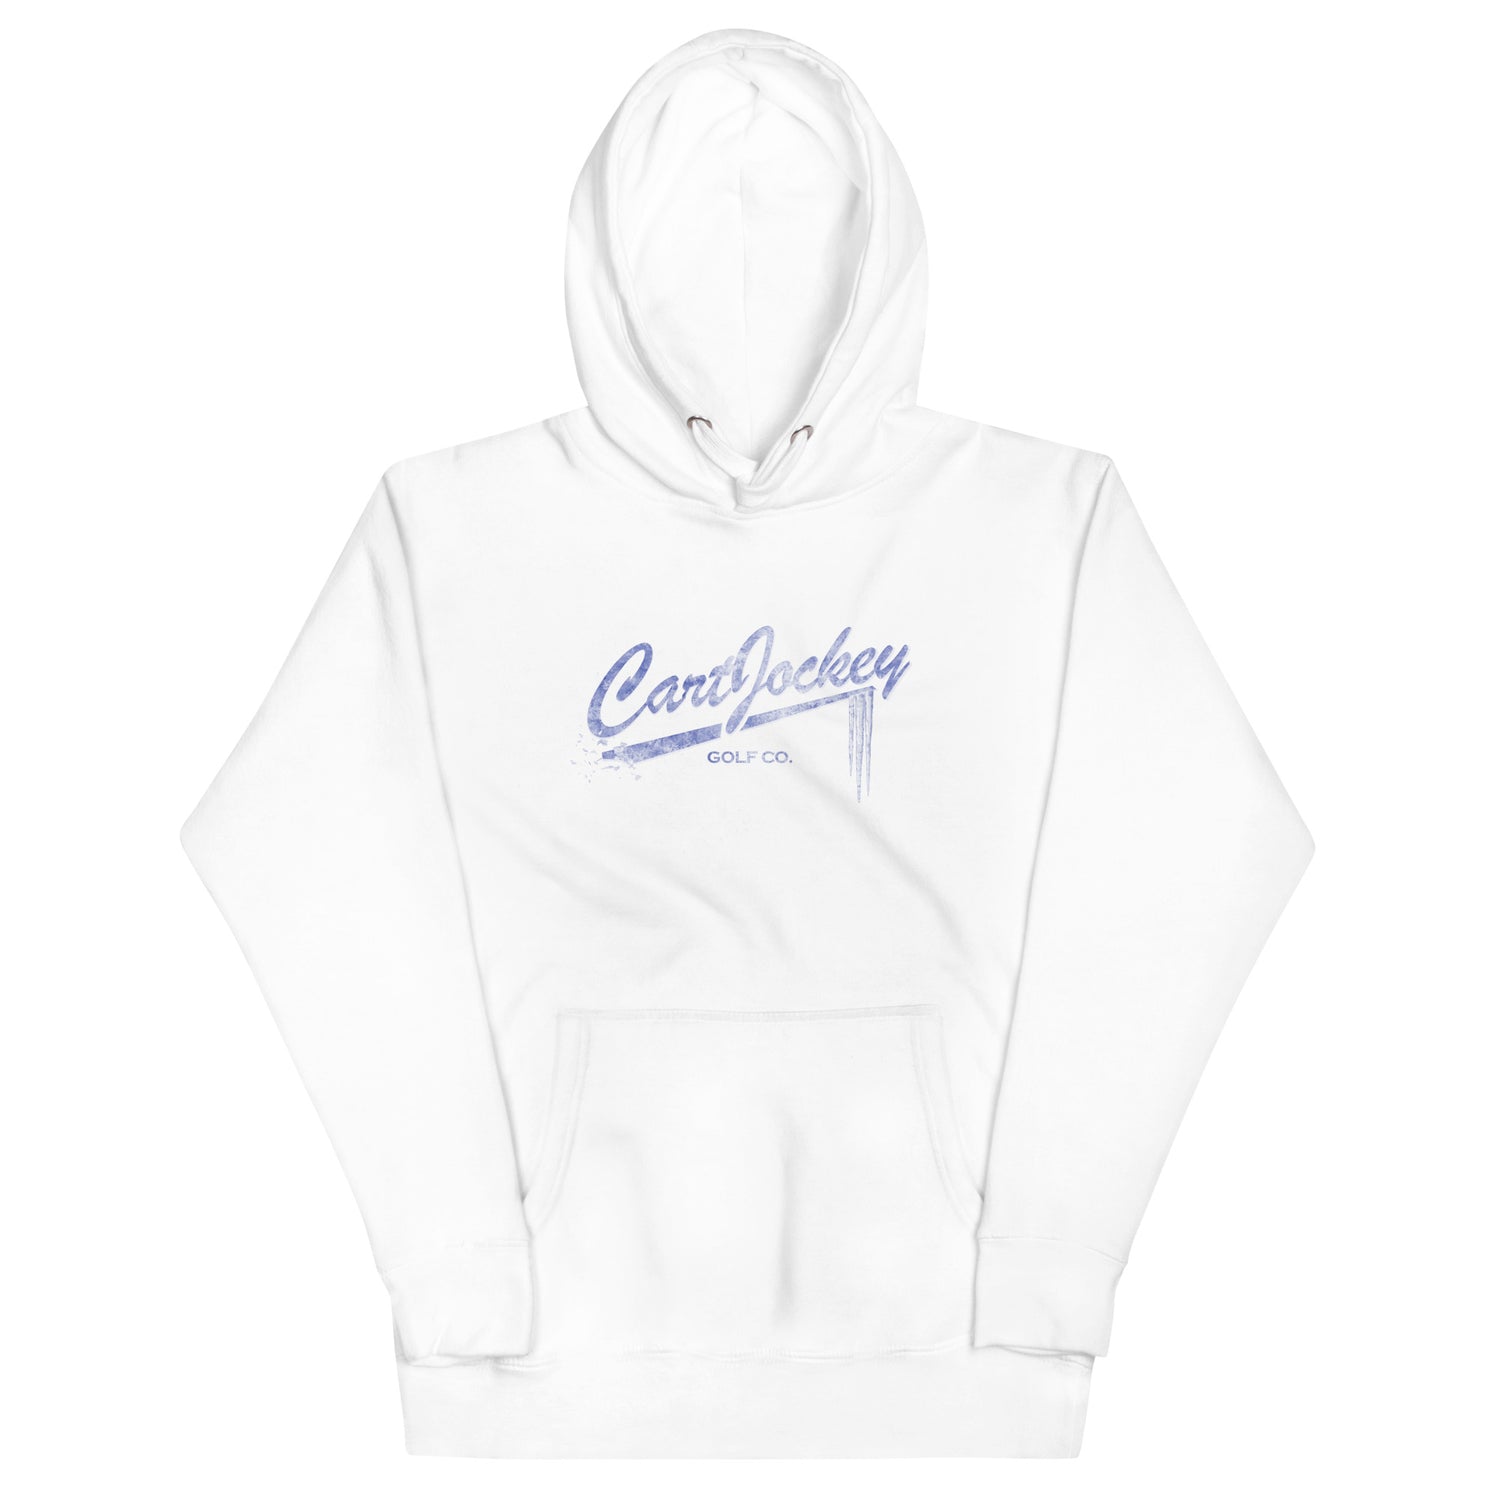 a Frost Hoodie by Cart Jockey Golf with a blue logo on it.